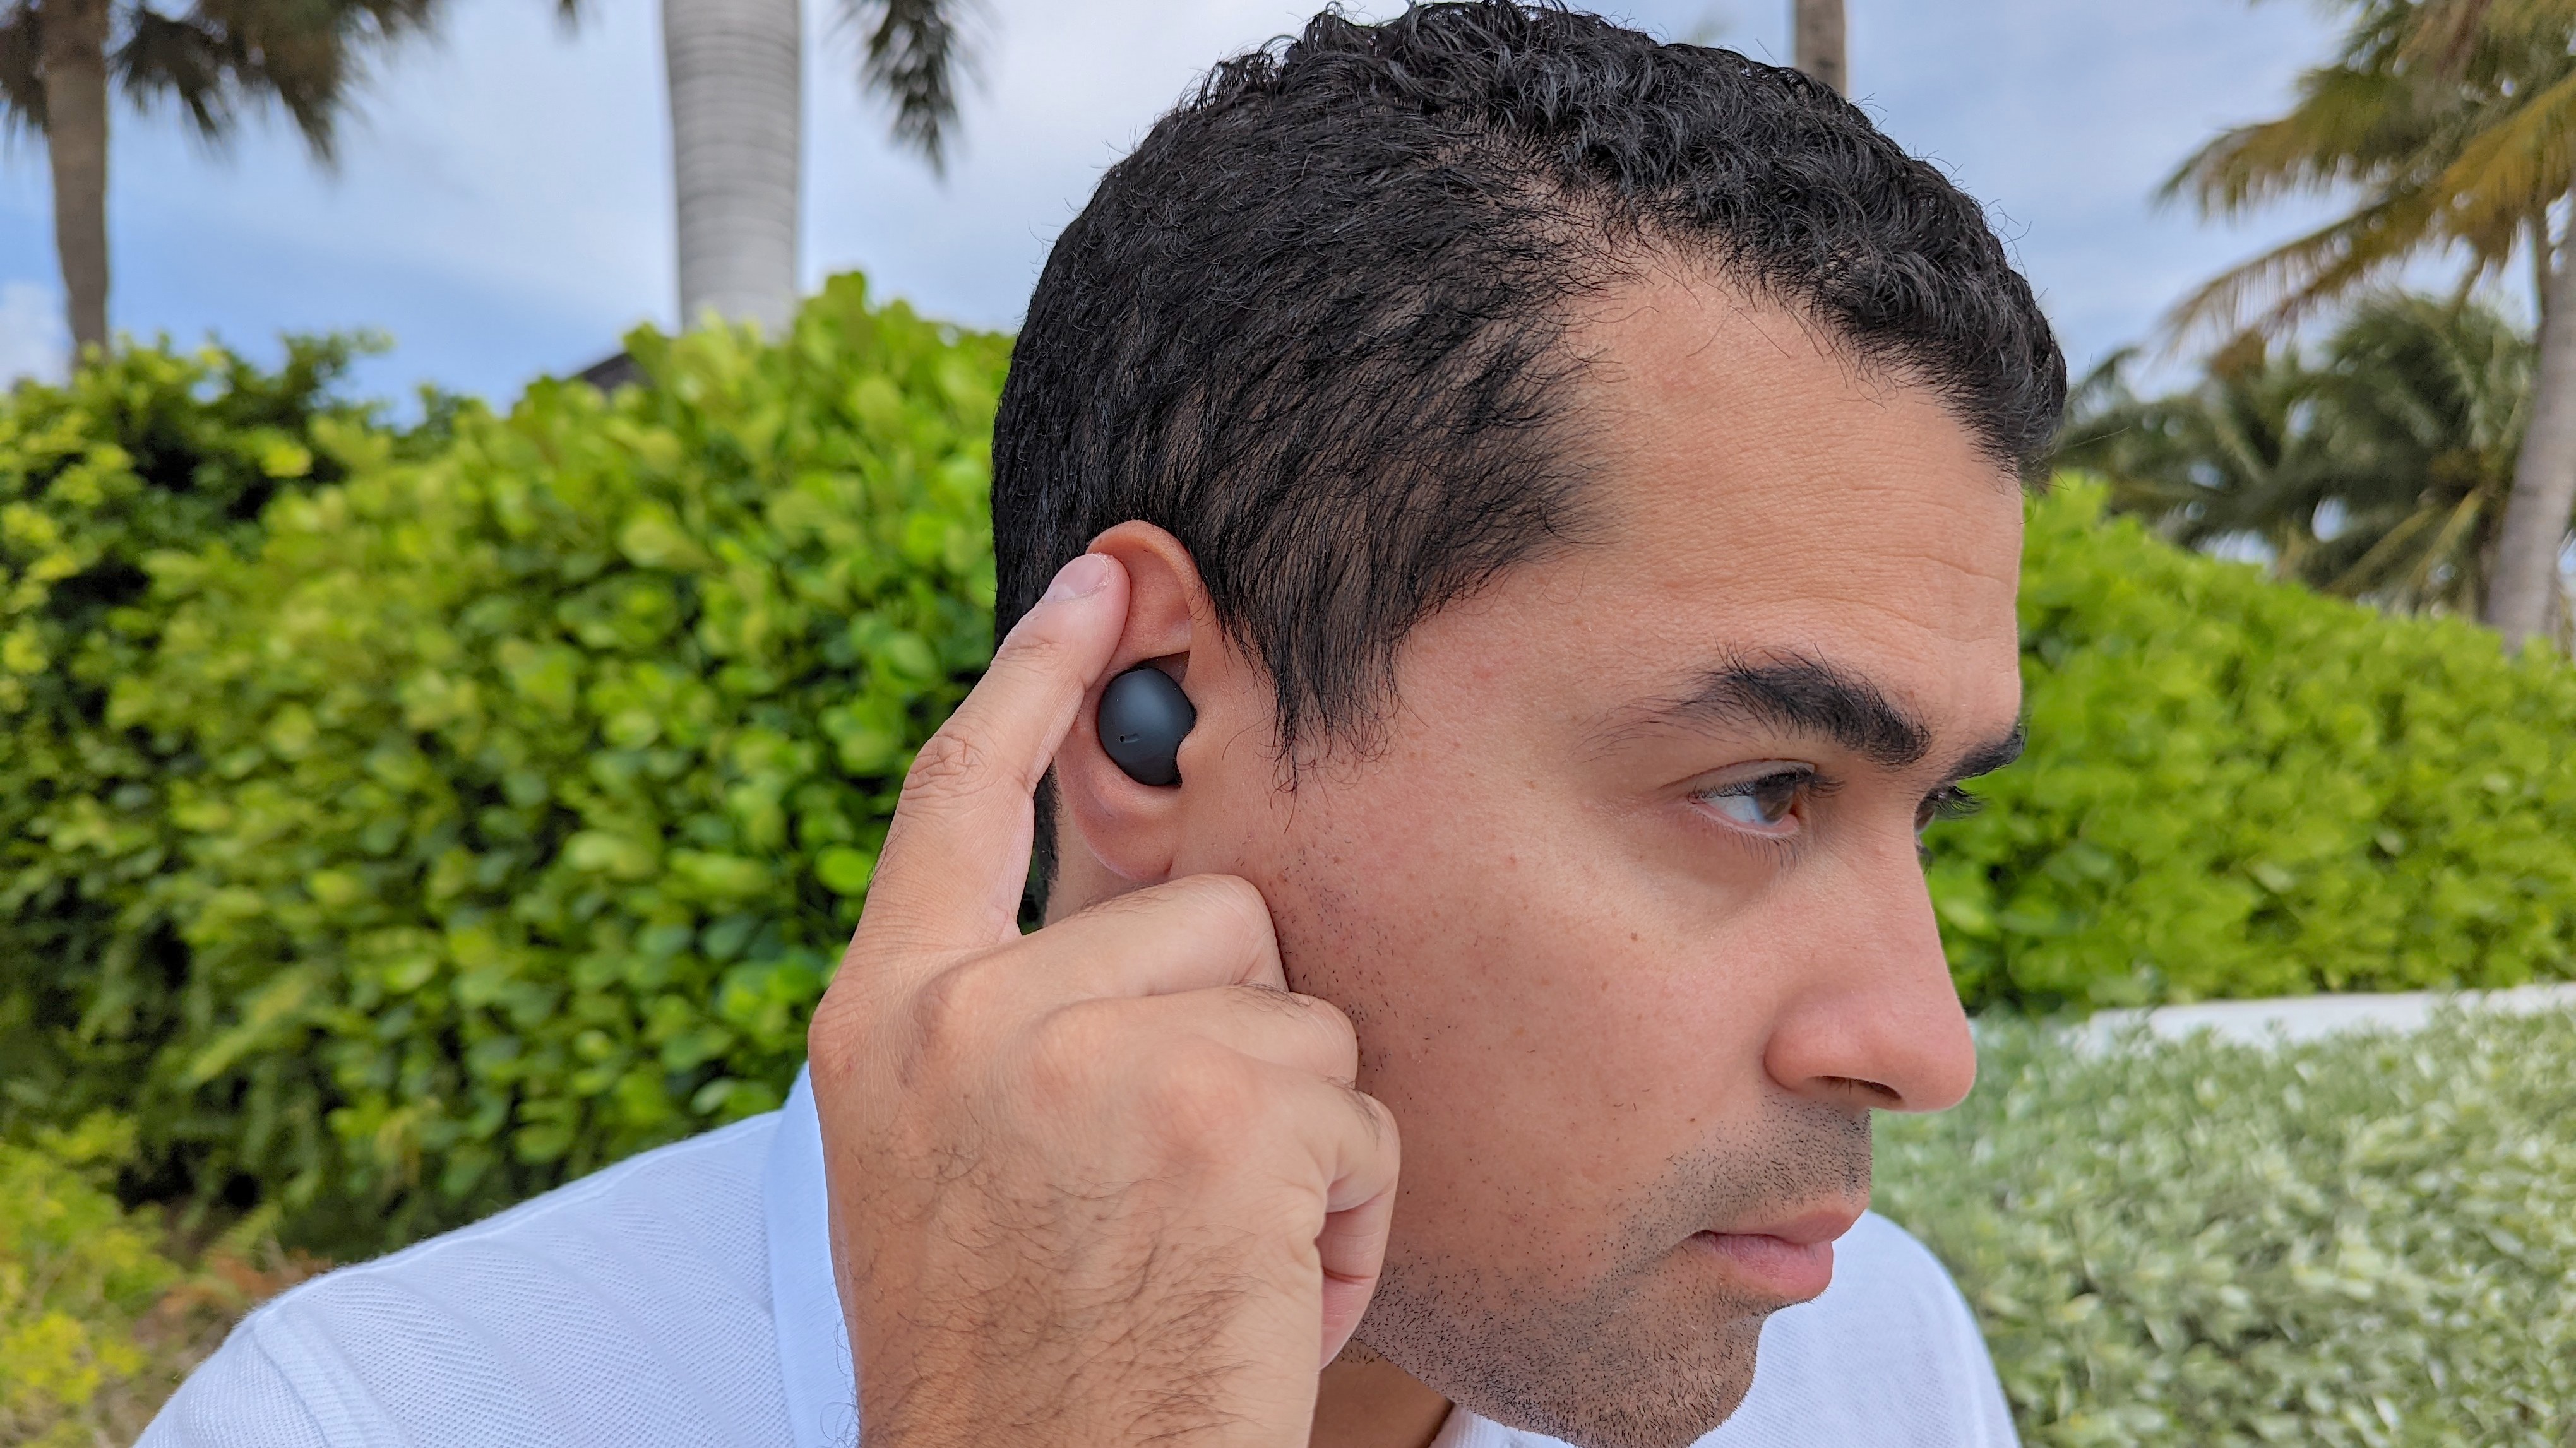 Demonstrating the Samsung Galaxy Buds 2 Pro's Double Tap Earbud Edge feature